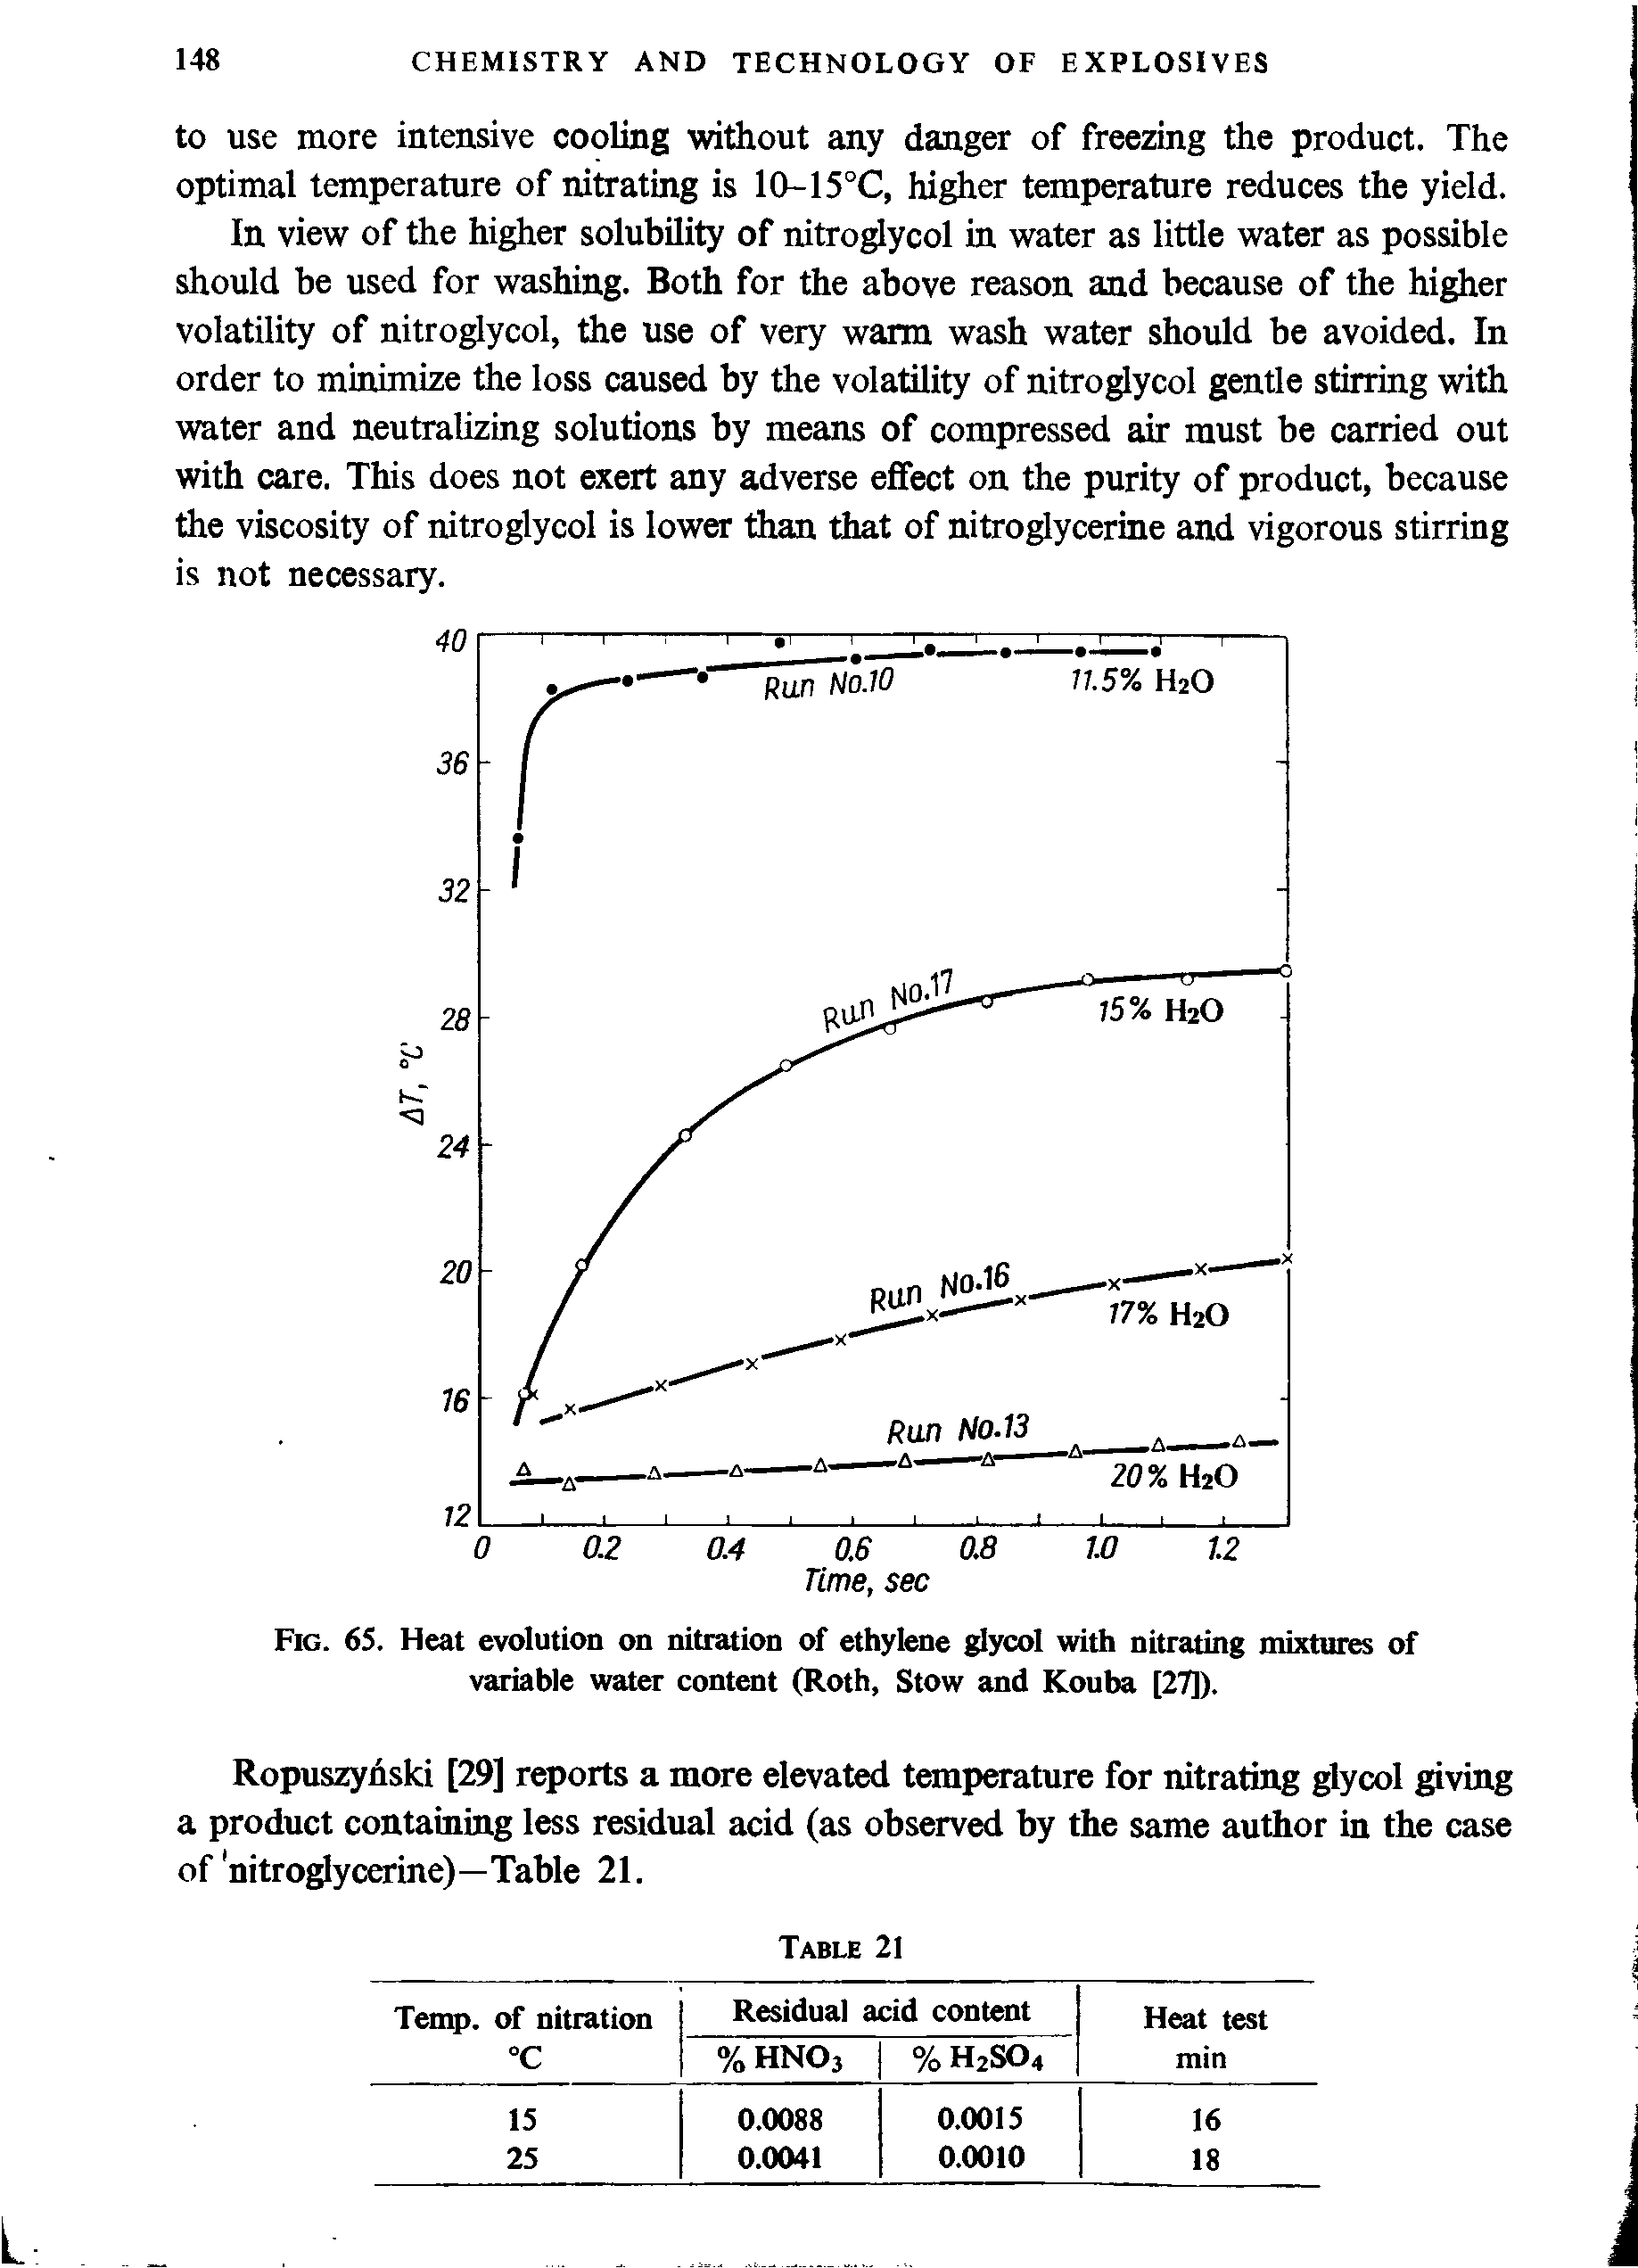 Fig. 65. Heat evolution on nitration of ethylene glycol with nitrating mixtures of variable water content (Roth, Stow and Kouba [27]).